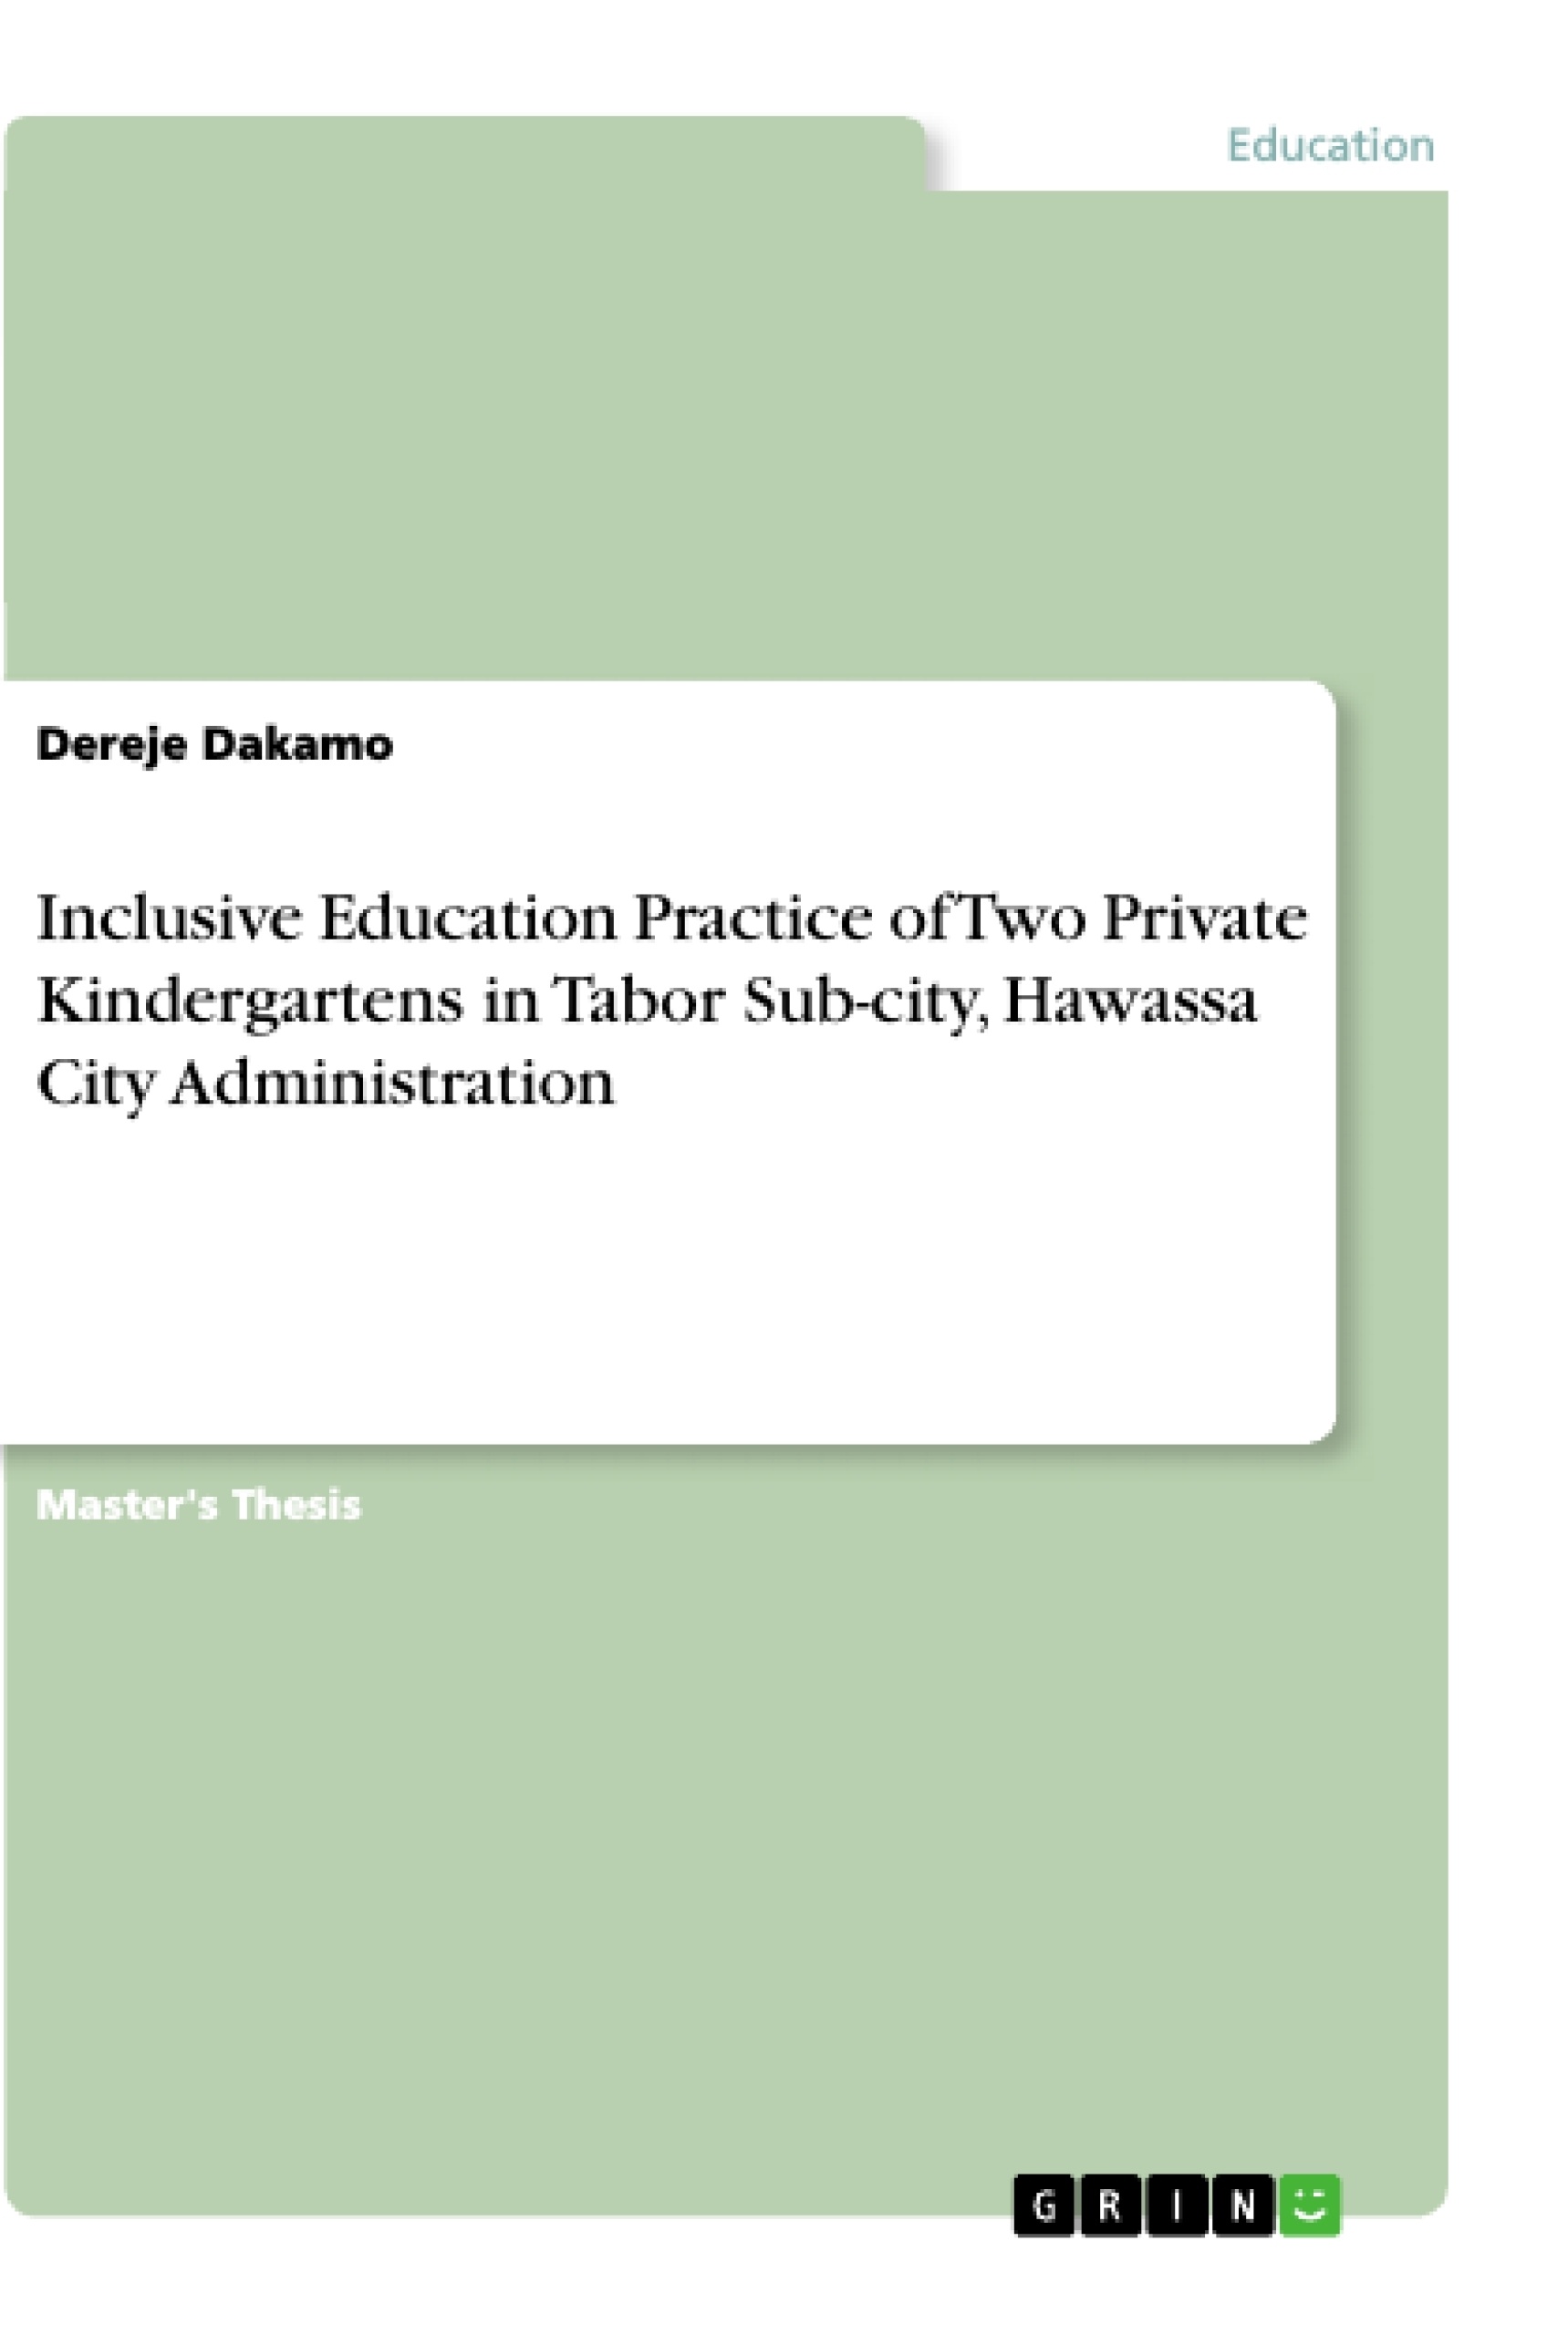 Title: Inclusive Education Practice of Two Private Kindergartens in Tabor Sub-city, Hawassa City Administration